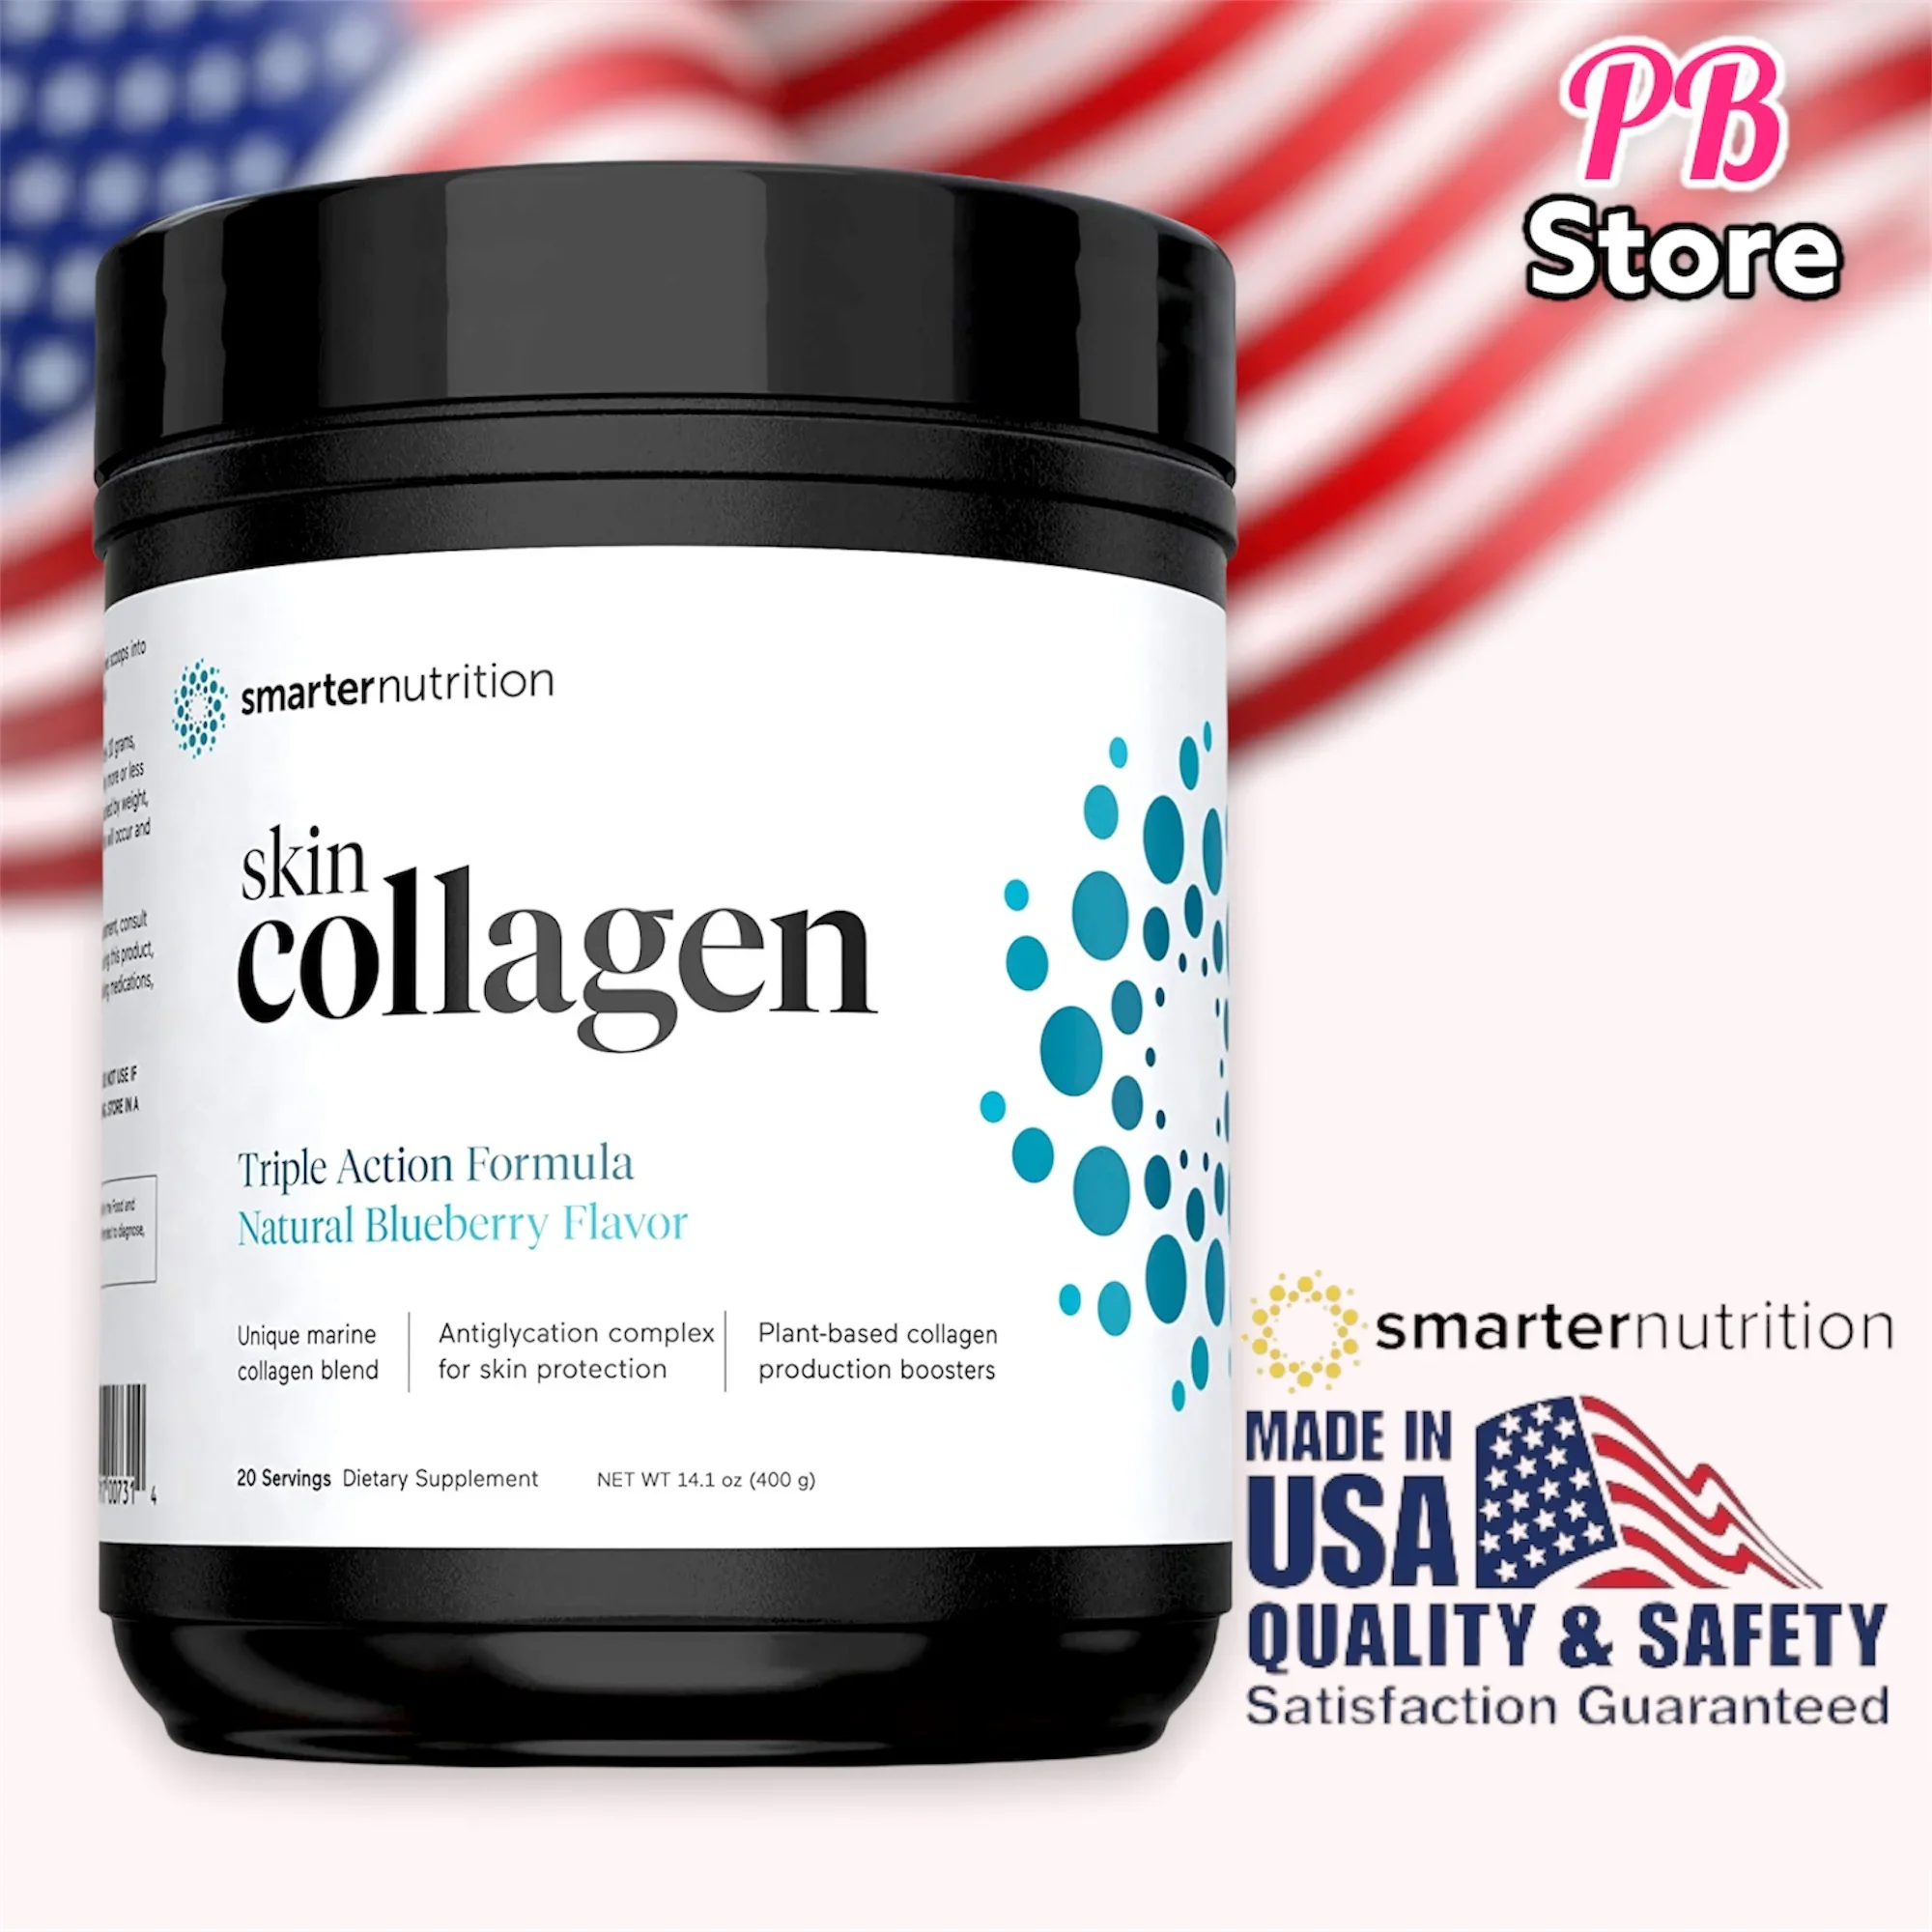 Smarter Nutrition Skin Collagen - Unique Marine Collagen Blend Type 1 with 10,036 mg per serving & Plant-Based Collagen Production Boosters